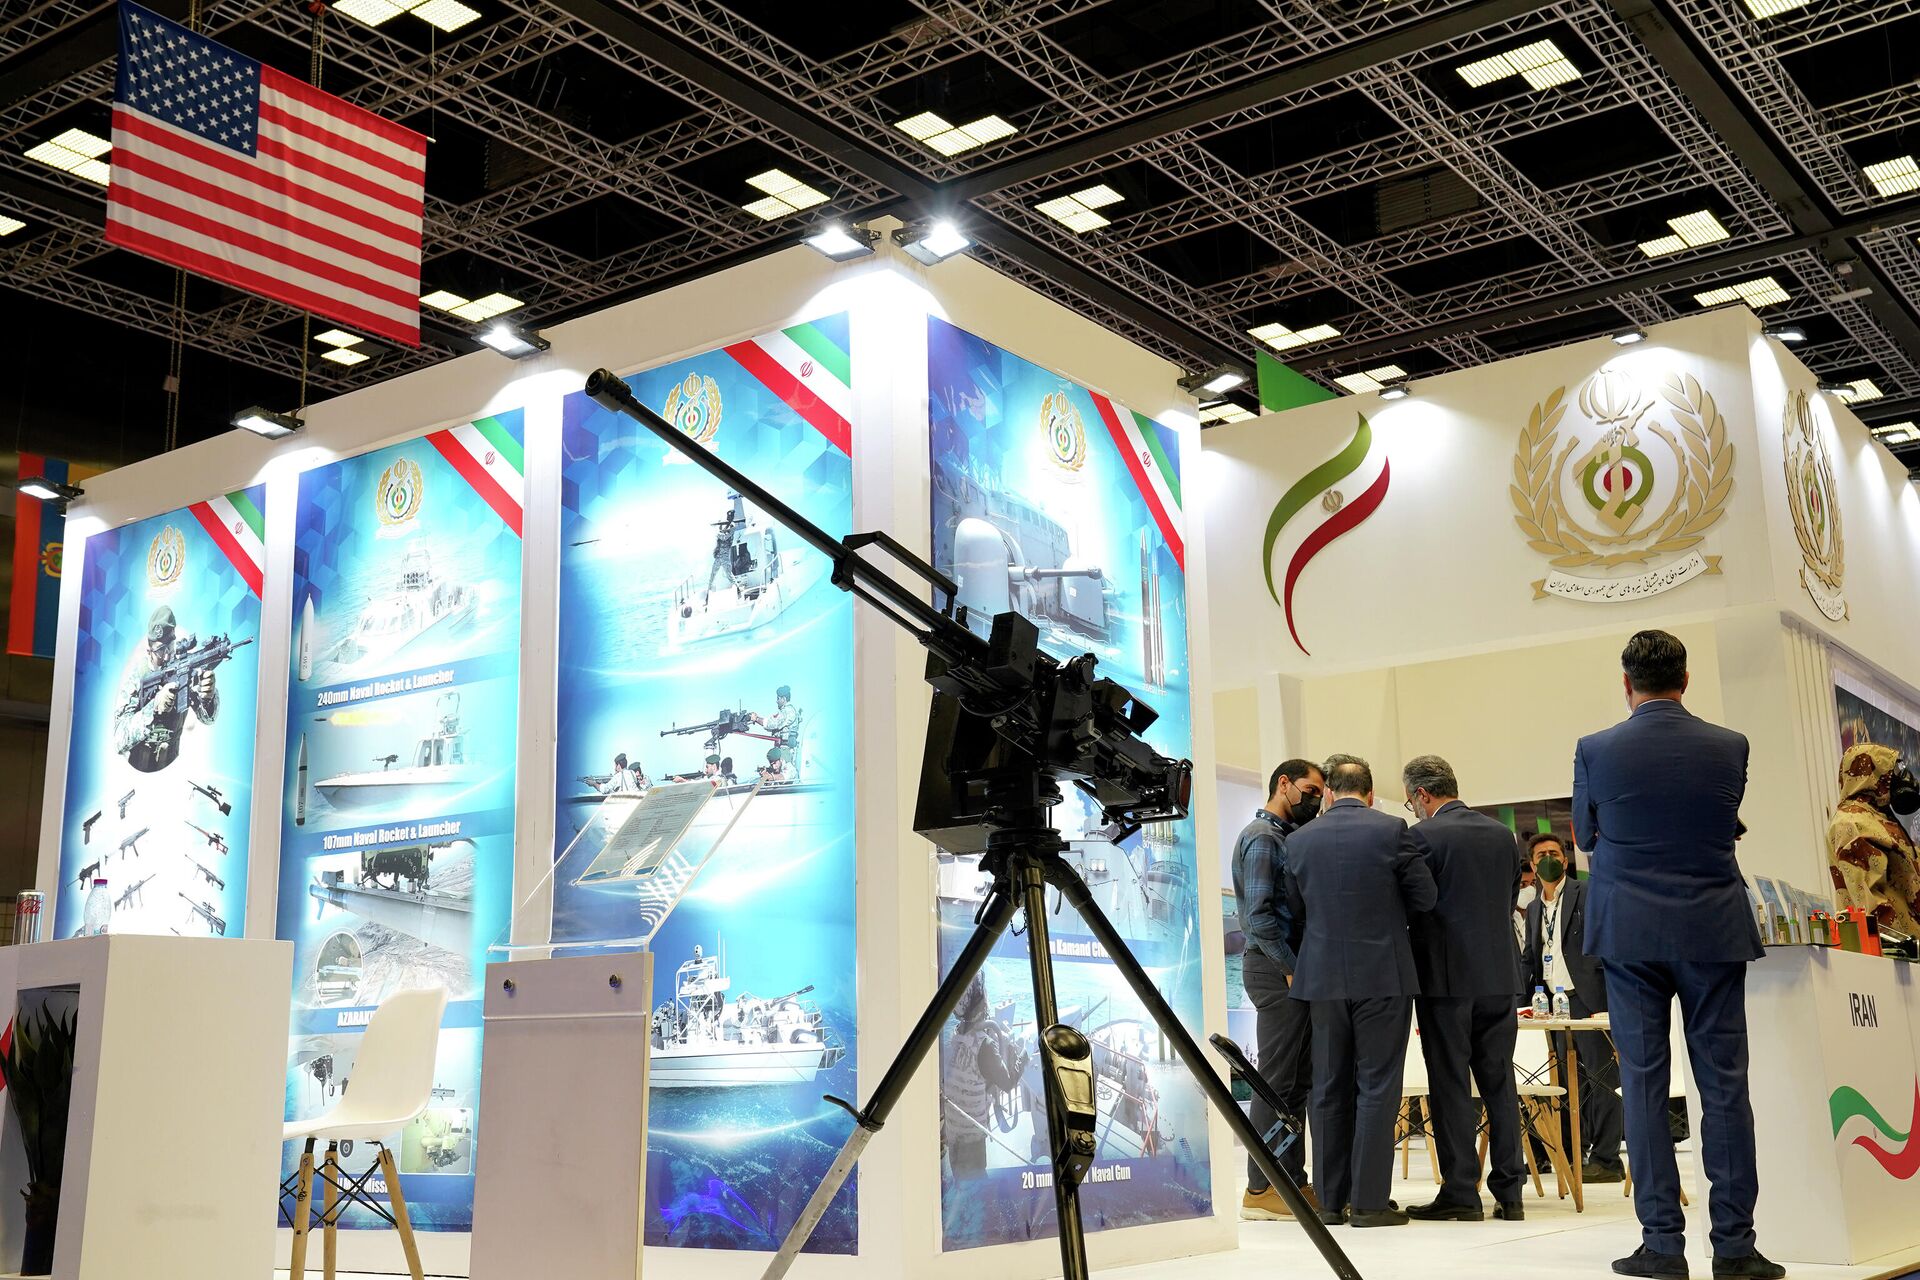 Iran's Pavilion at the DIMDEX exhibition in Doha, Qatar, Wednesday, March 23, 2022. Iran, under sweeping economic sanctions, was hawking weapons on Wednesday at a Qatari defense exhibit, a surprising sight at the major conference also showcasing American companies and fighter jets. - Sputnik International, 1920, 23.03.2022